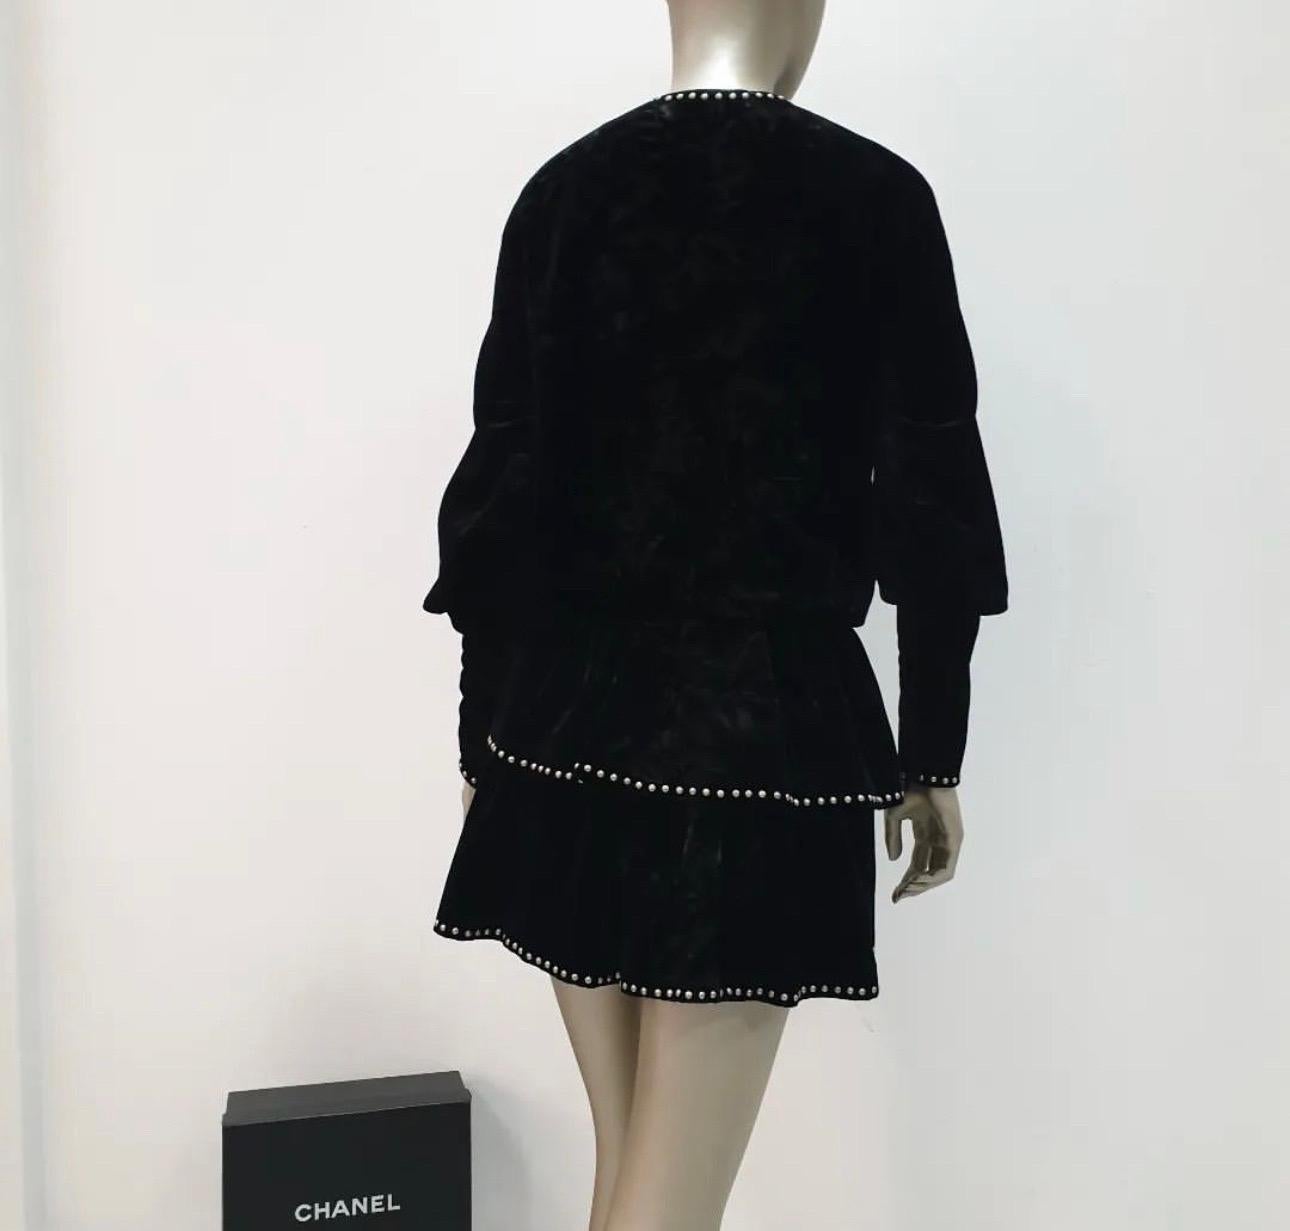 From 2019
Retail price $4490
This black silk blend studded velvet dress from Saint Laurent features a round neck, long sleeves, silver-tone stud detailing and a short length.
Sz.36
Good condition. Minor signs of wear.